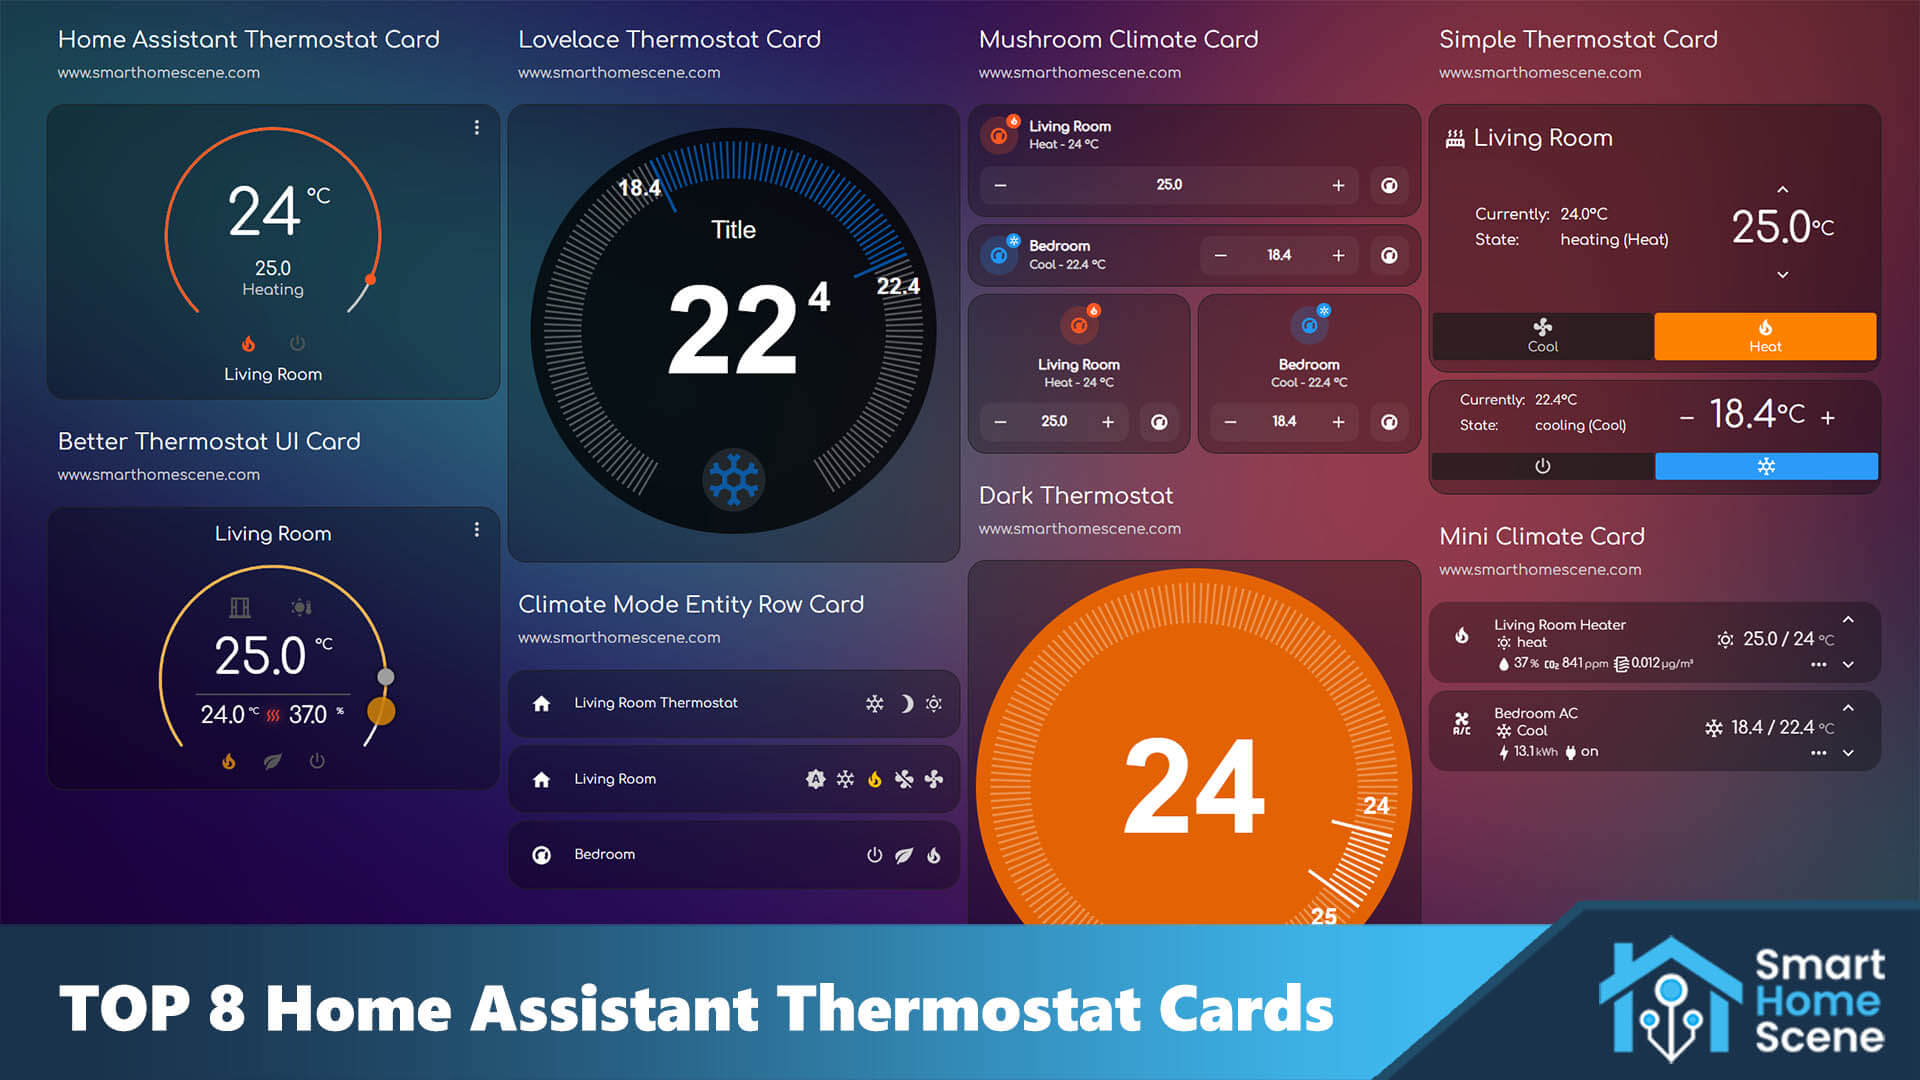 https://smarthomescene.com/wp-content/uploads/2023/02/top-8-home-assistant-thermostat-cards-featured.jpg